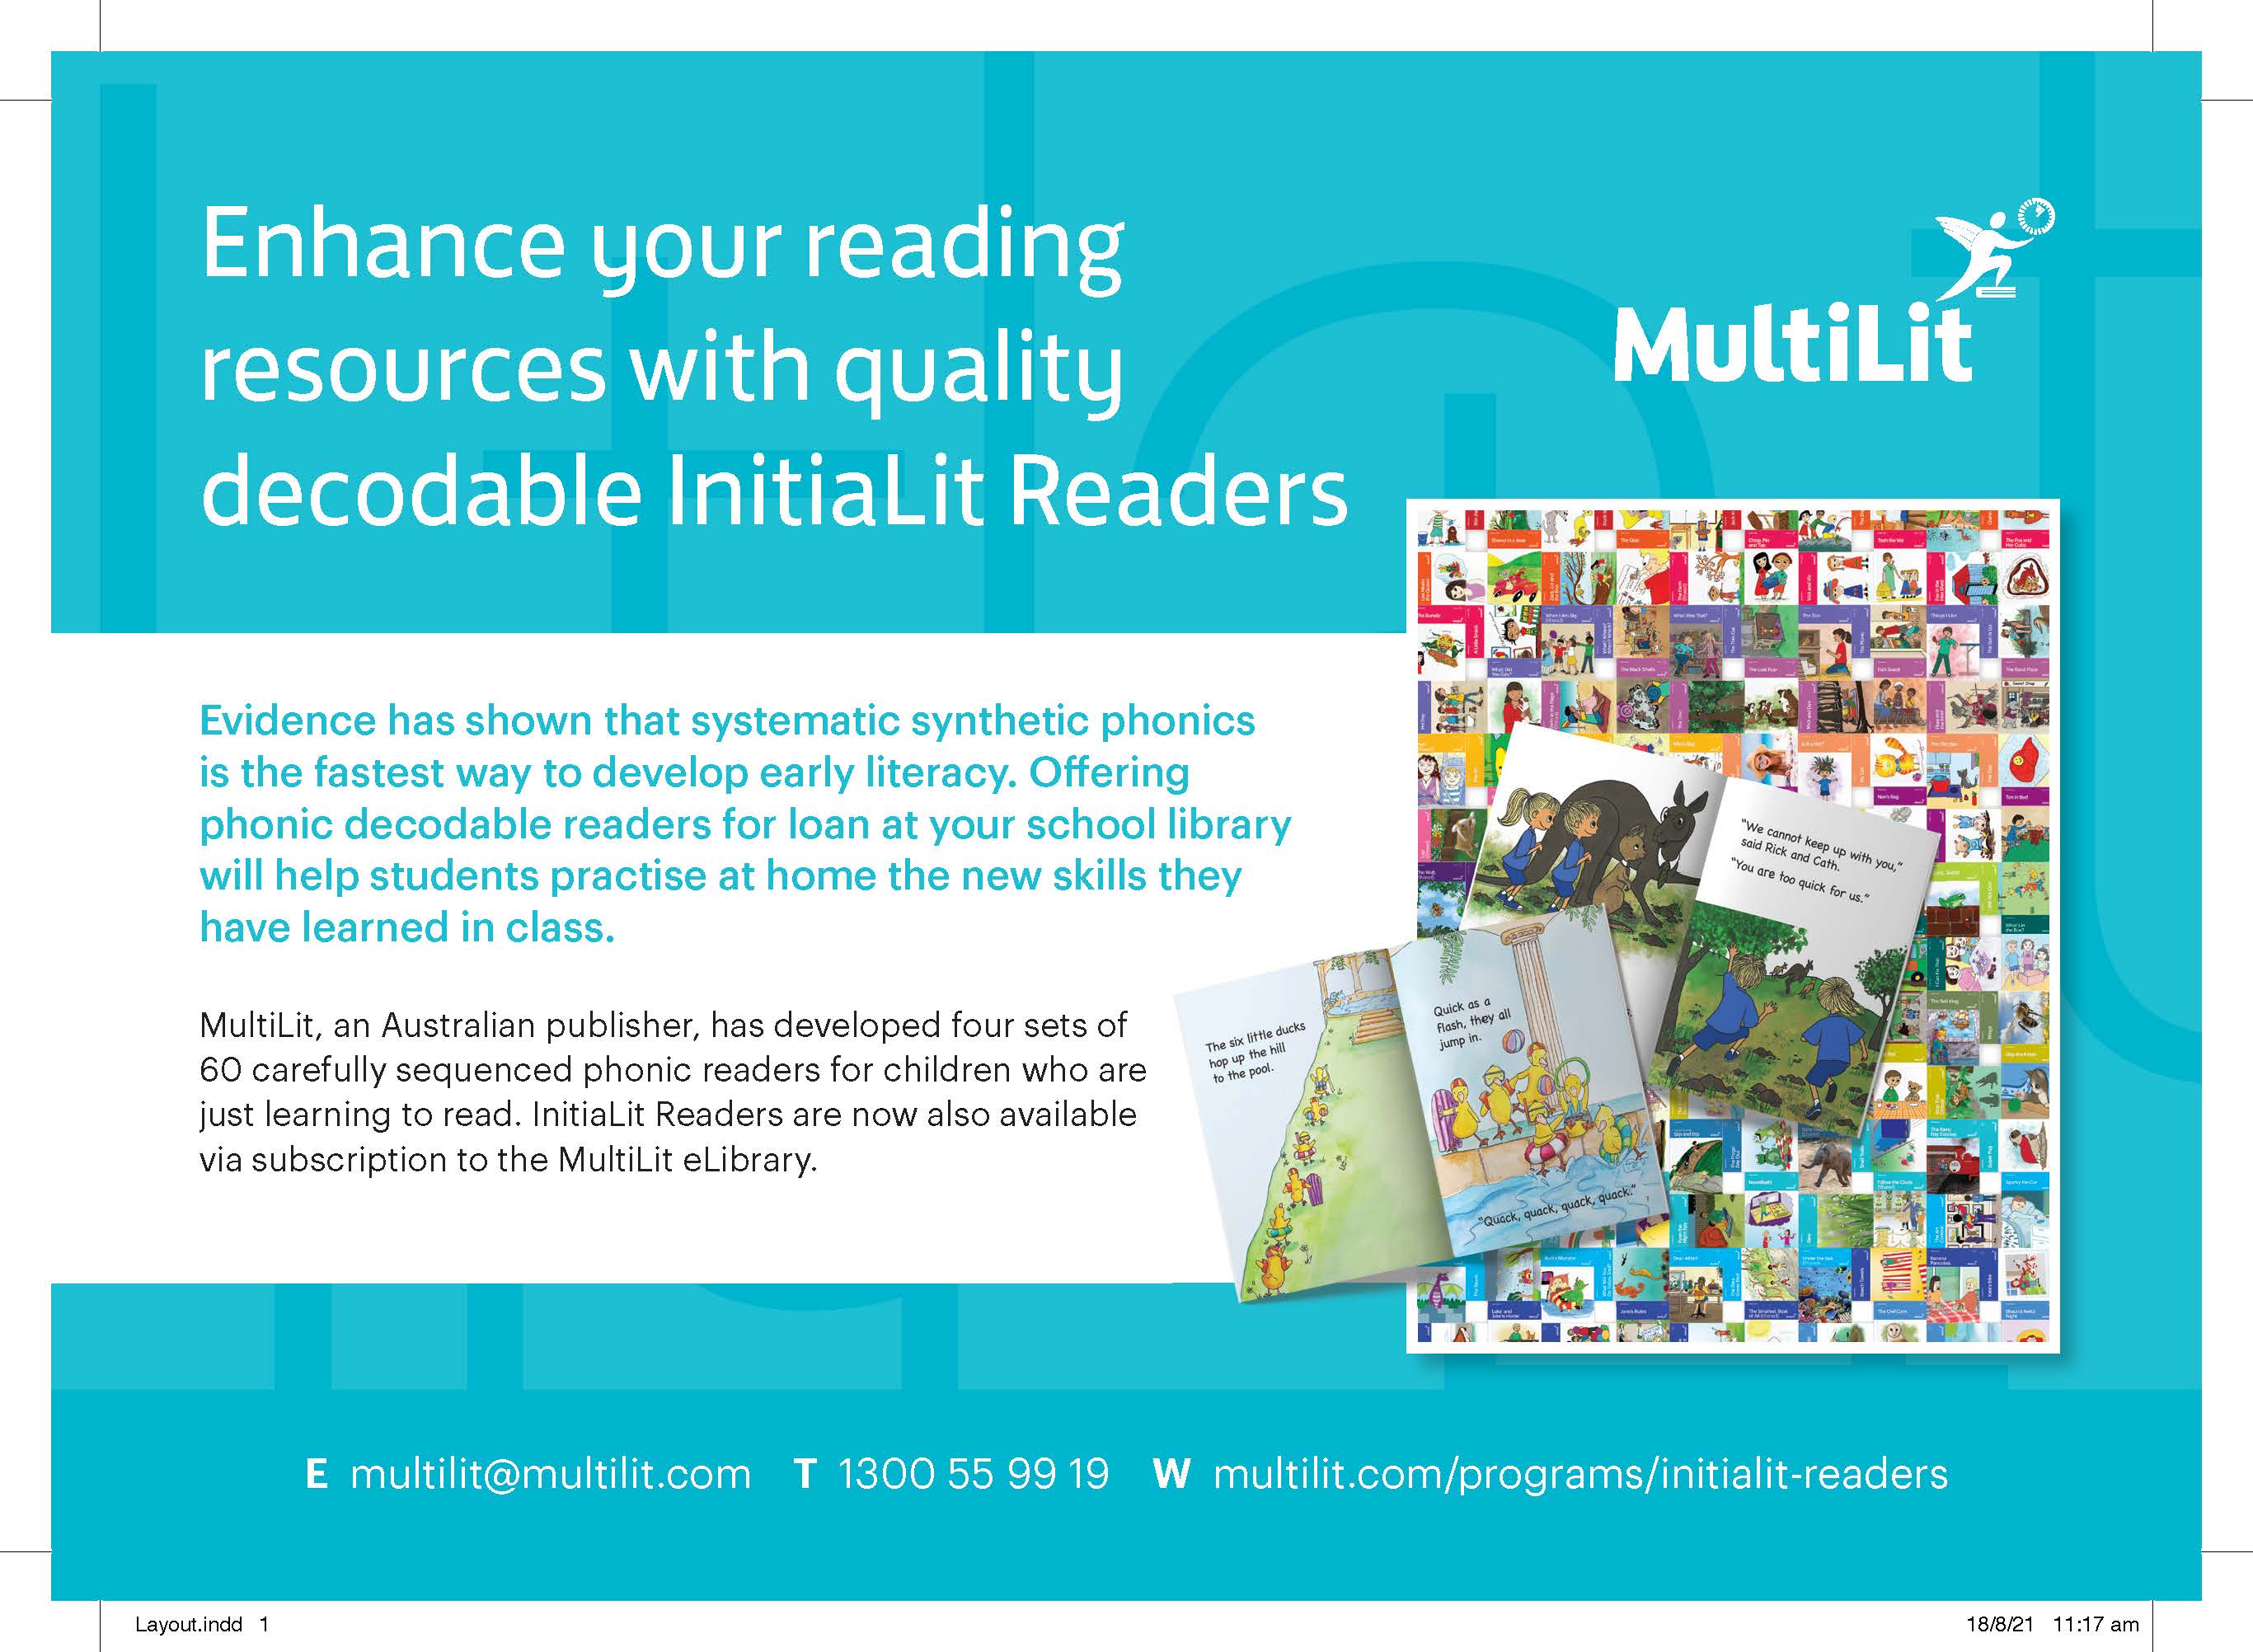 MultiLit decodable InitiaLit Readers